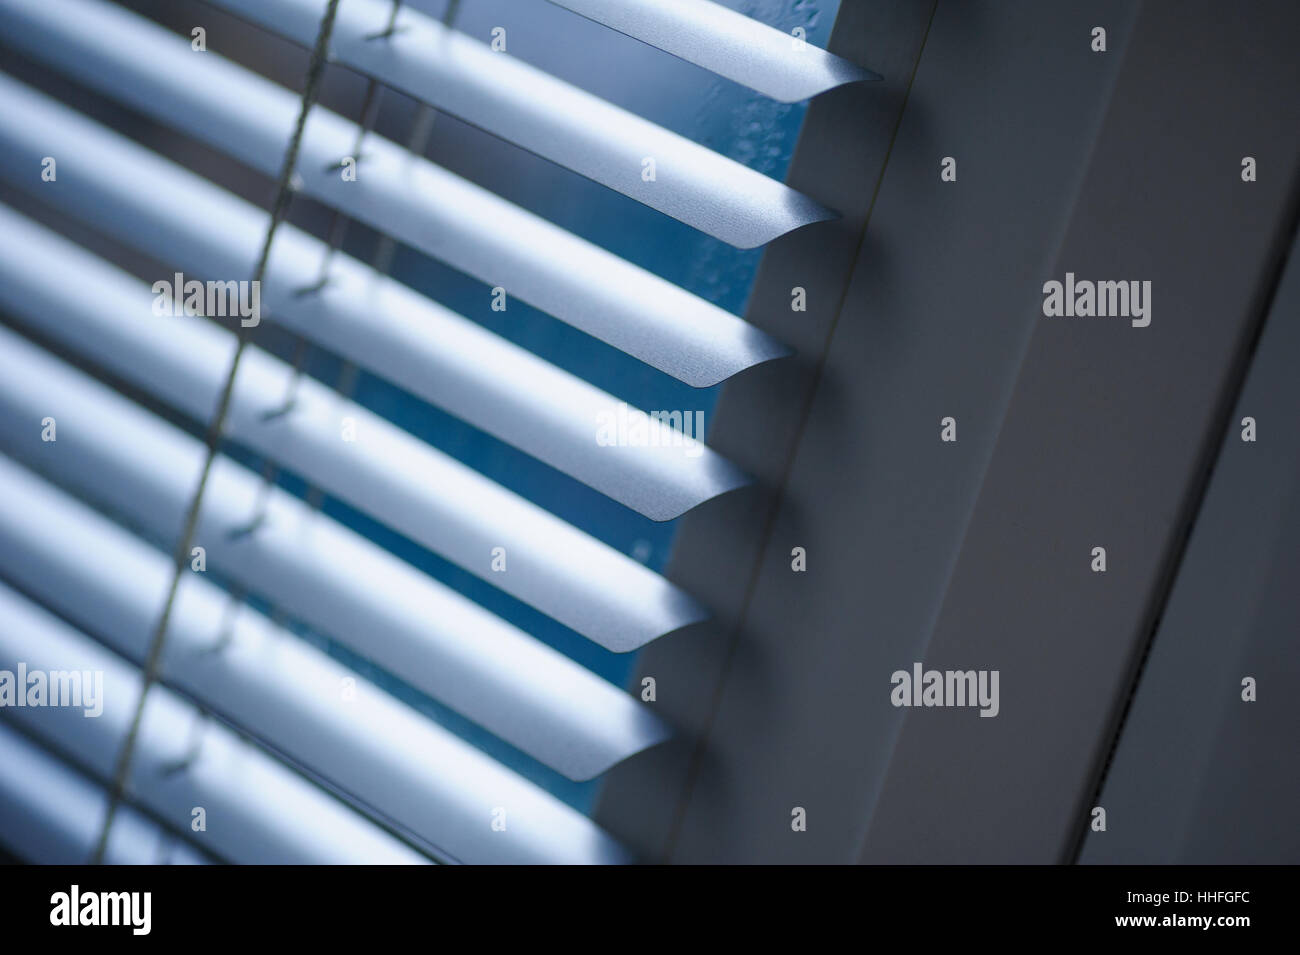 White shutters on the window in the Office Stock Photo